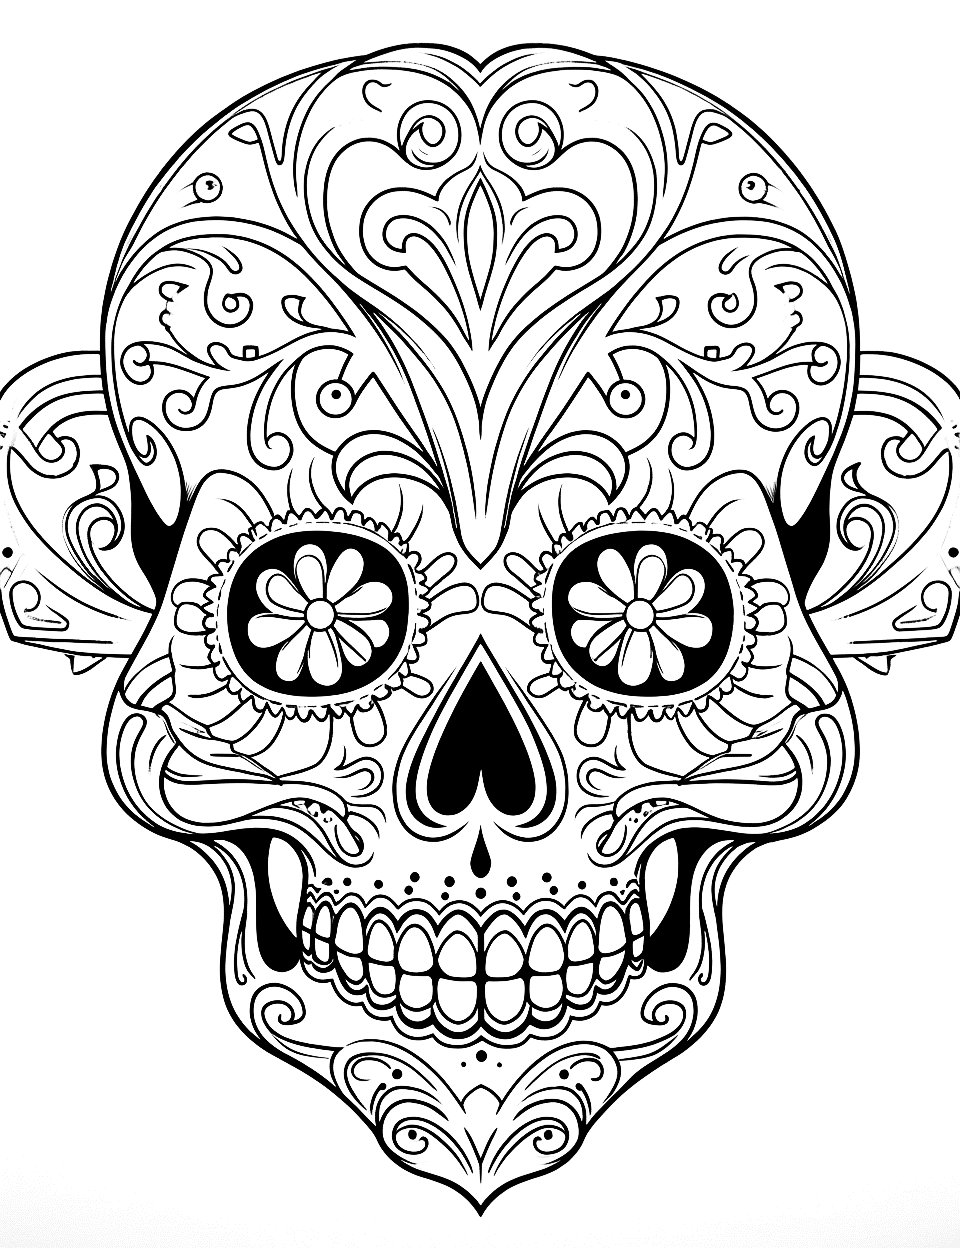 Mystical Skull Adult Coloring Page - A detailed skull adorned with tribal markings.